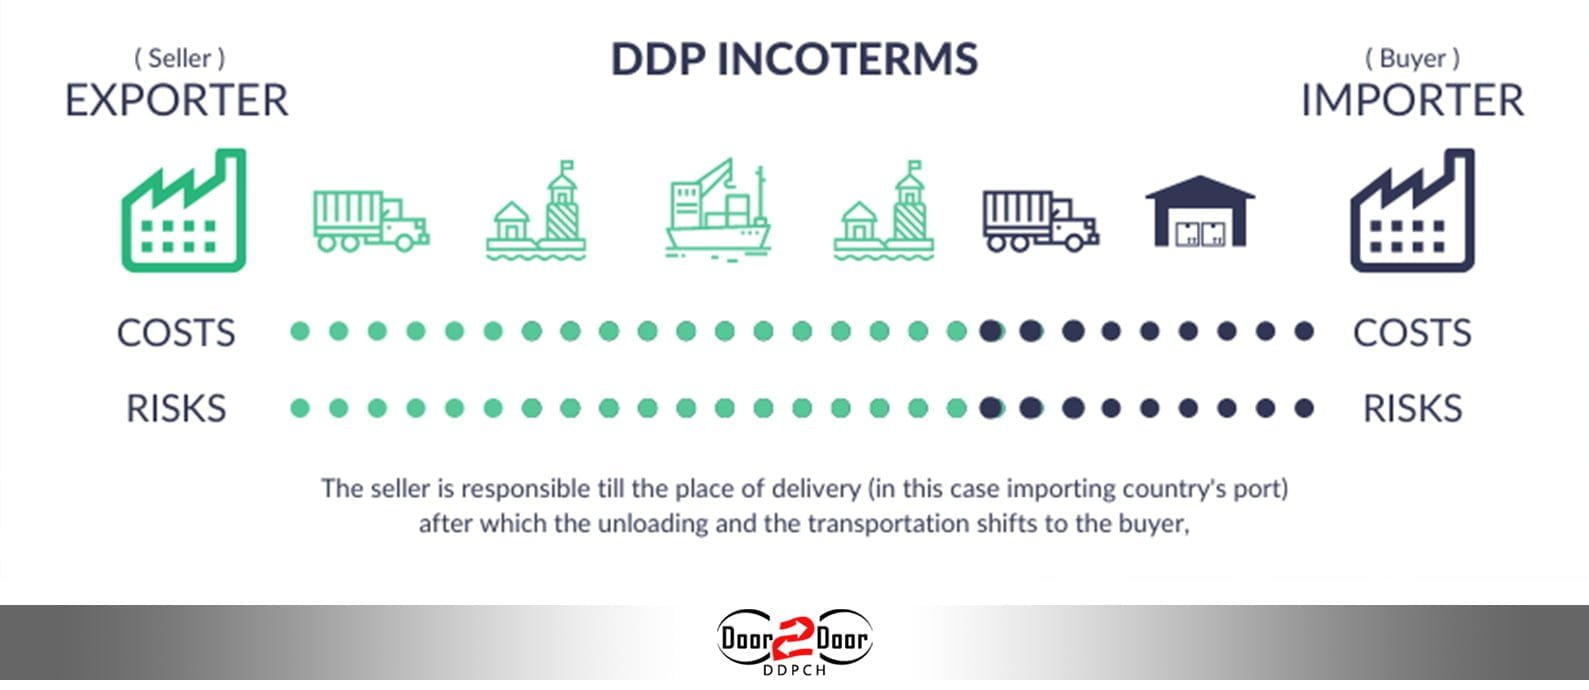 These incoterms are necessary to know.